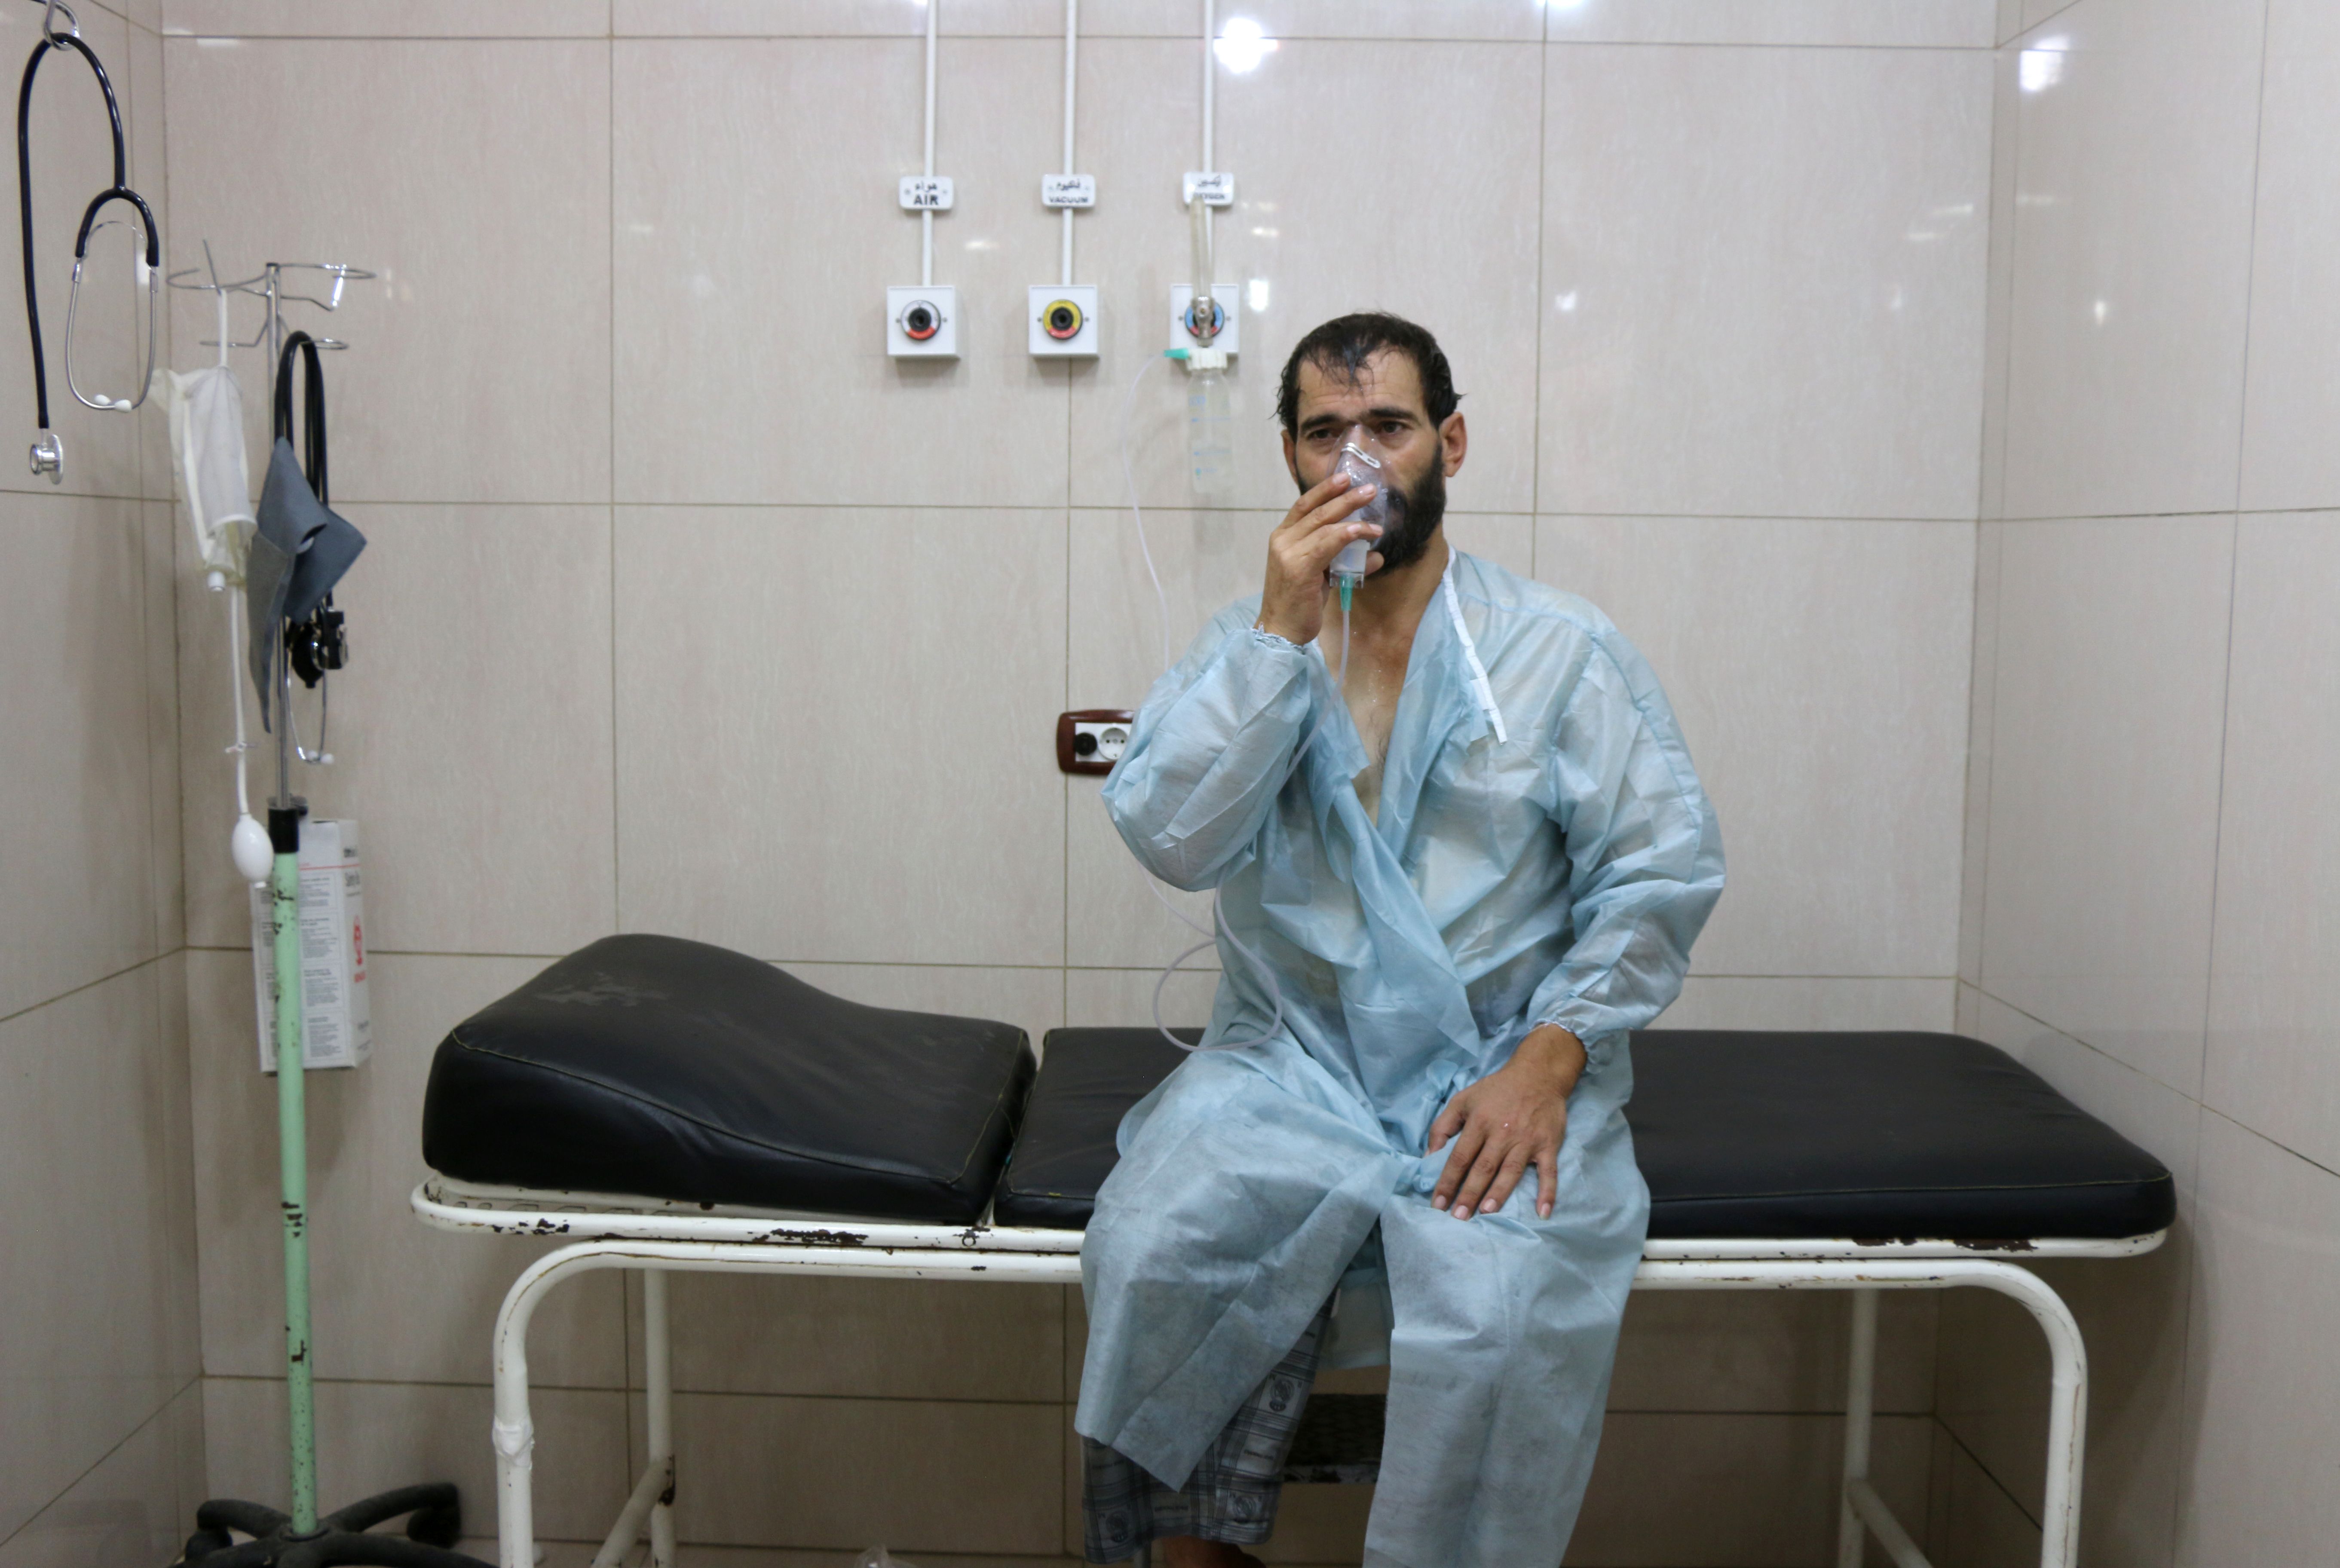 A Syrian man takes oxygen to ease his breathing problems